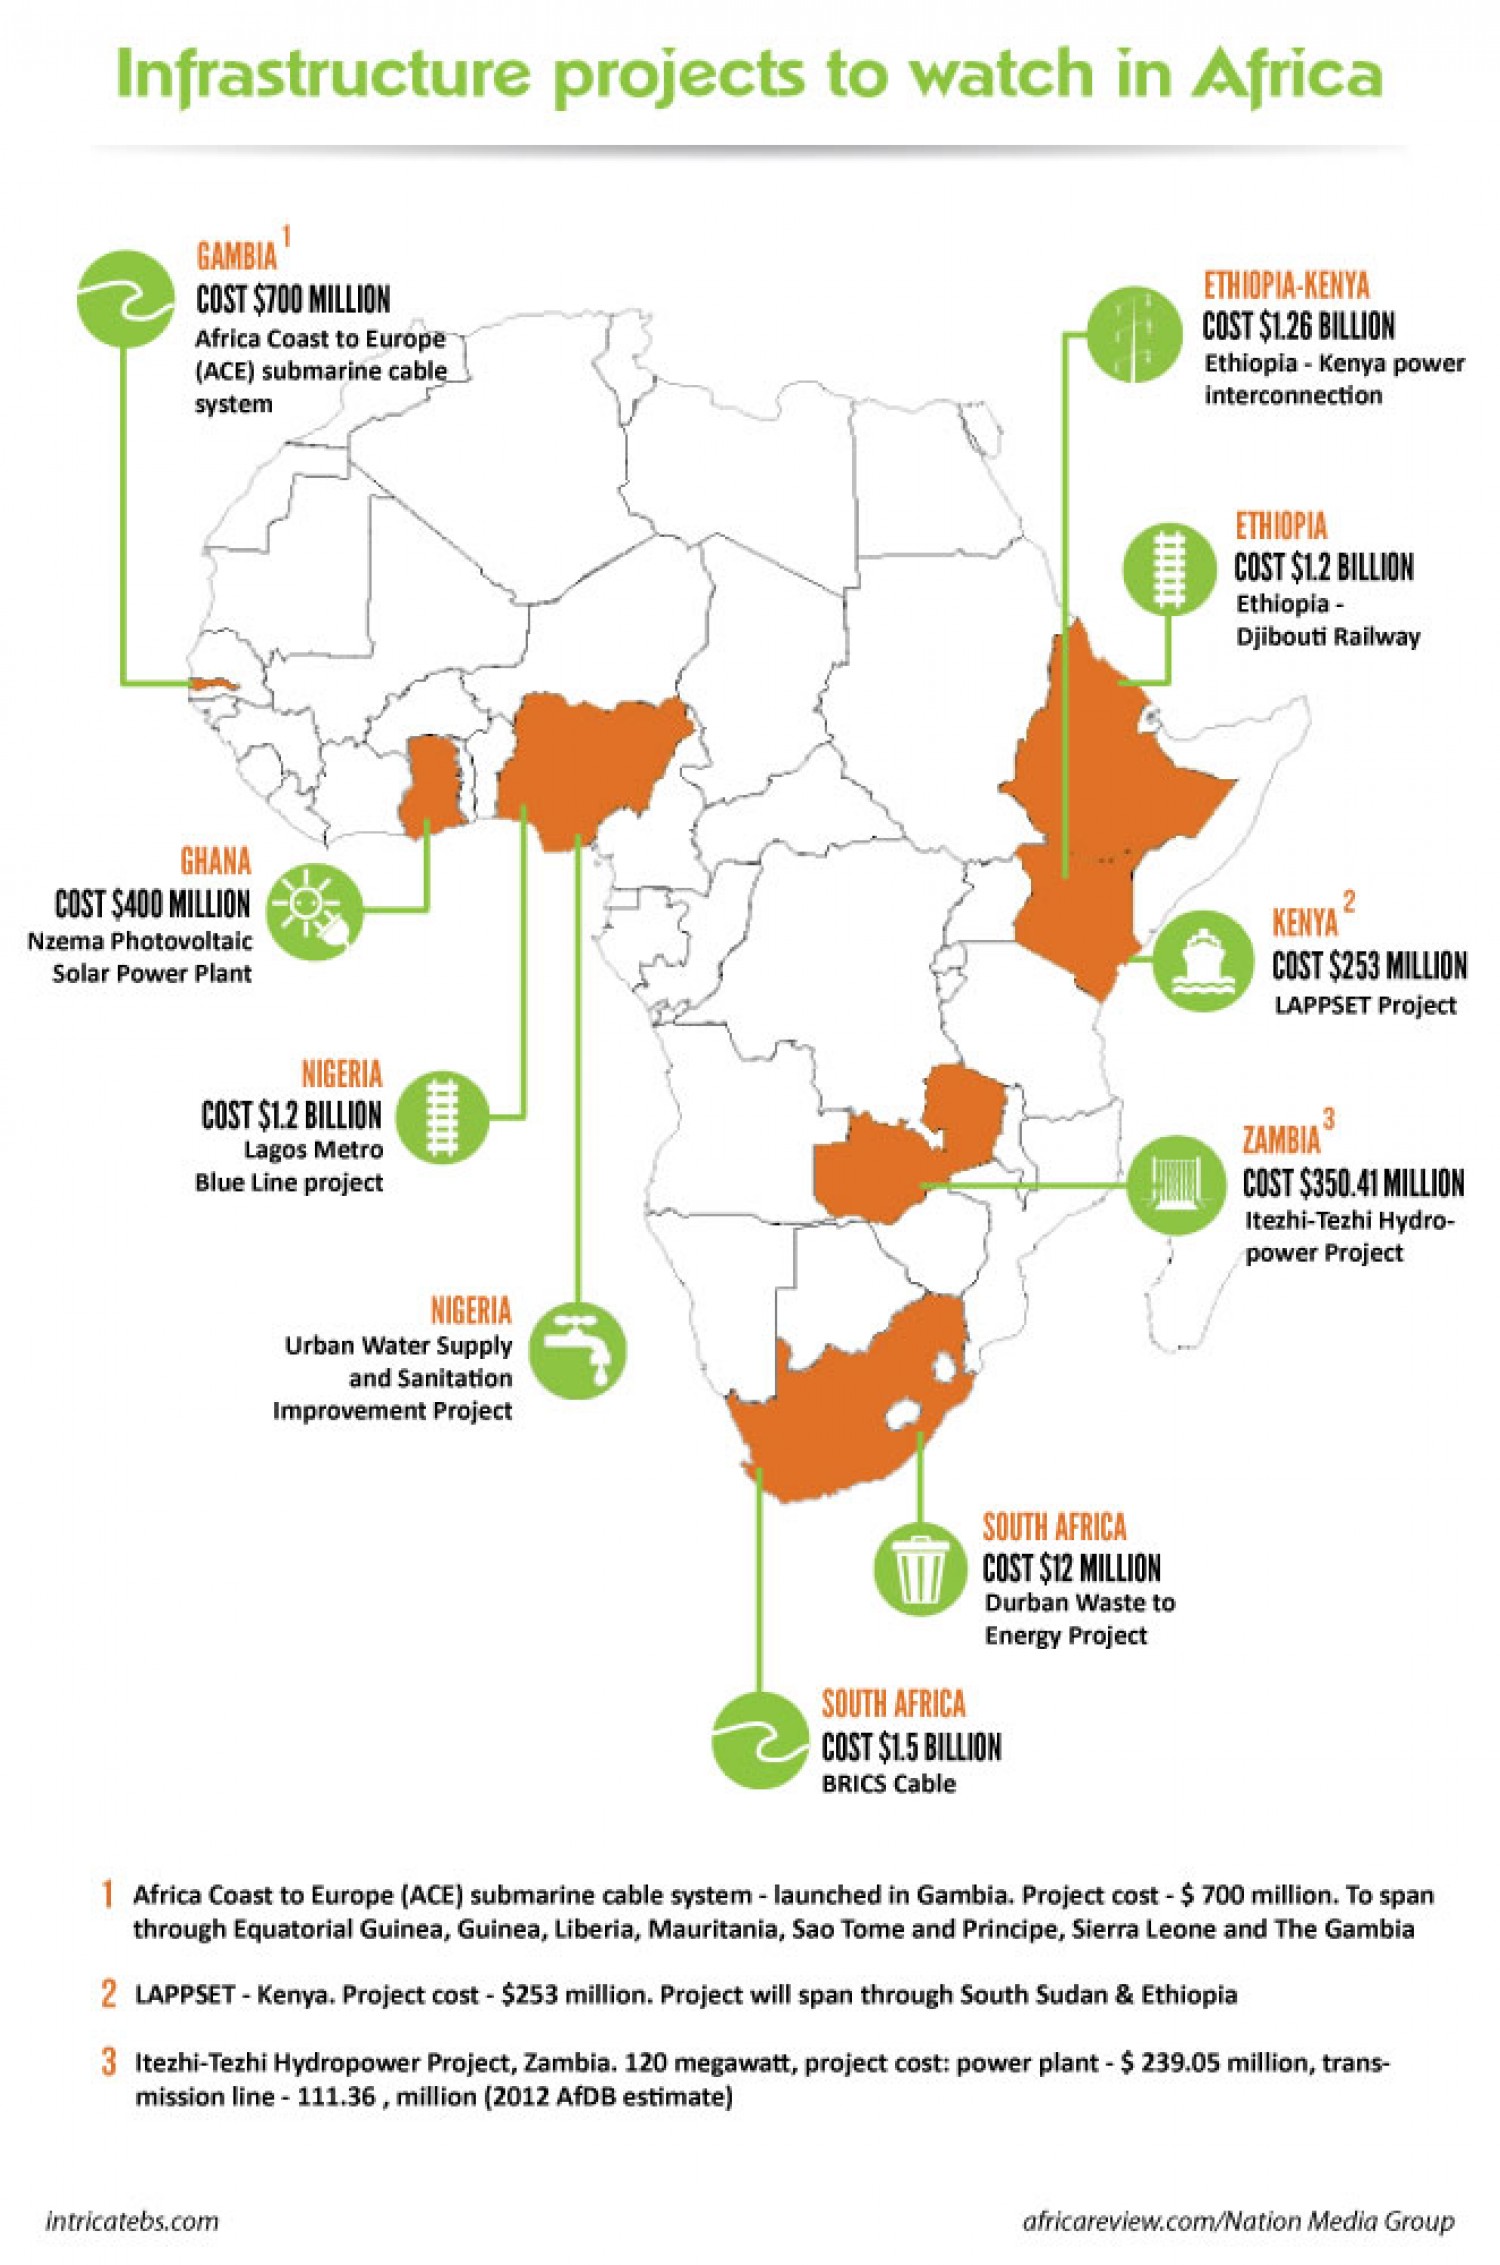 Infrastructure Projects in Africa